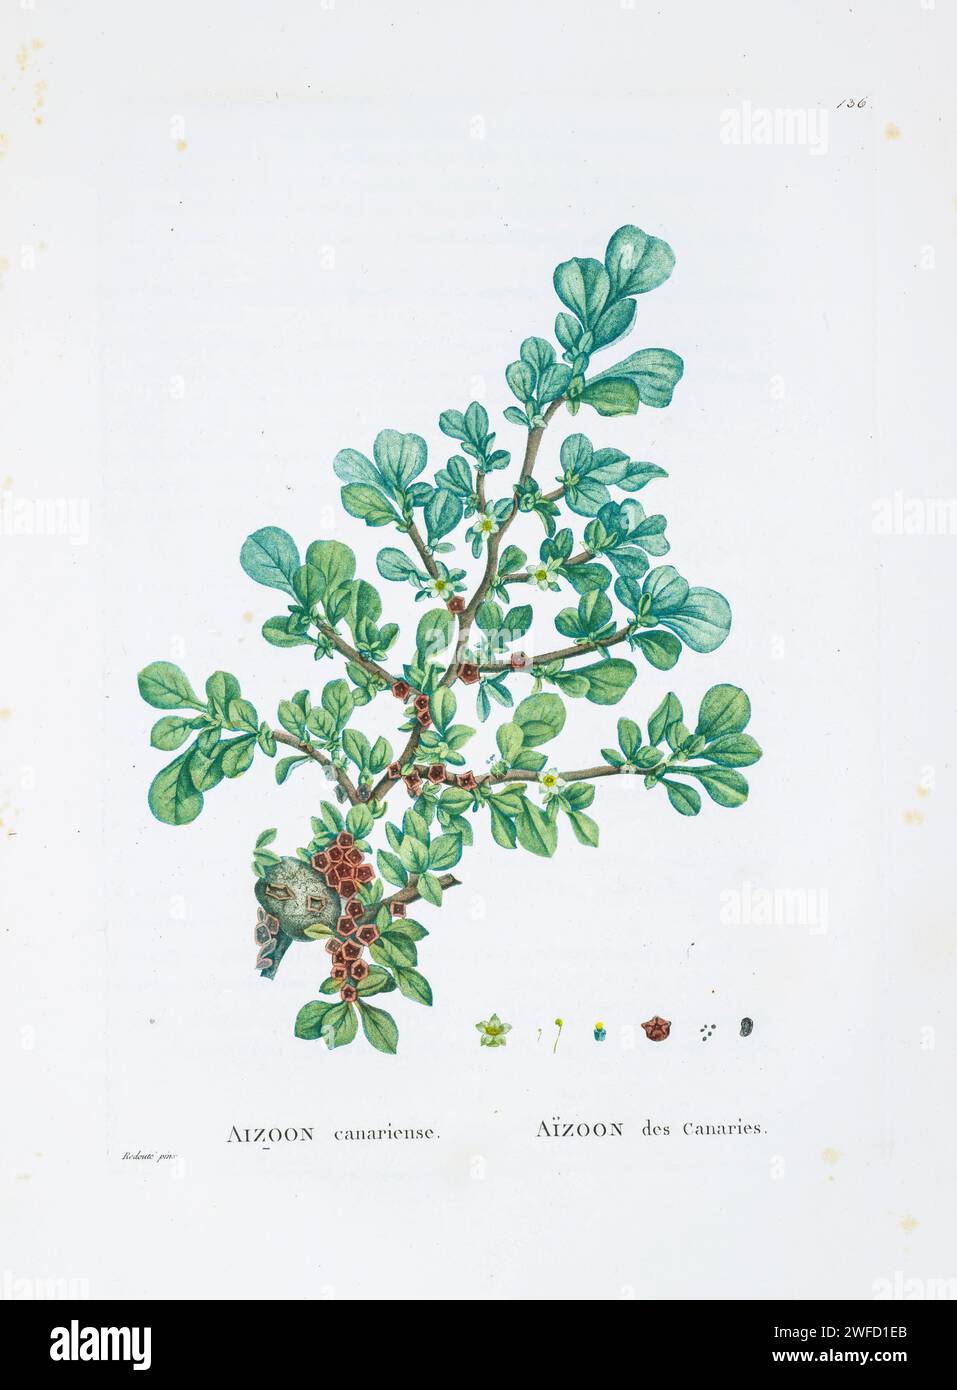 Aizoon canariense from History of Succulent Plants [Plantarum historia succulentarum / Histoire des plantes grasses] painted by Pierre-Joseph Redouté and described by Augustin Pyramus de Candolle 1799 Aizoon canariense is a species of small leafy annual plant in the family Aizoaceae. Stock Photo